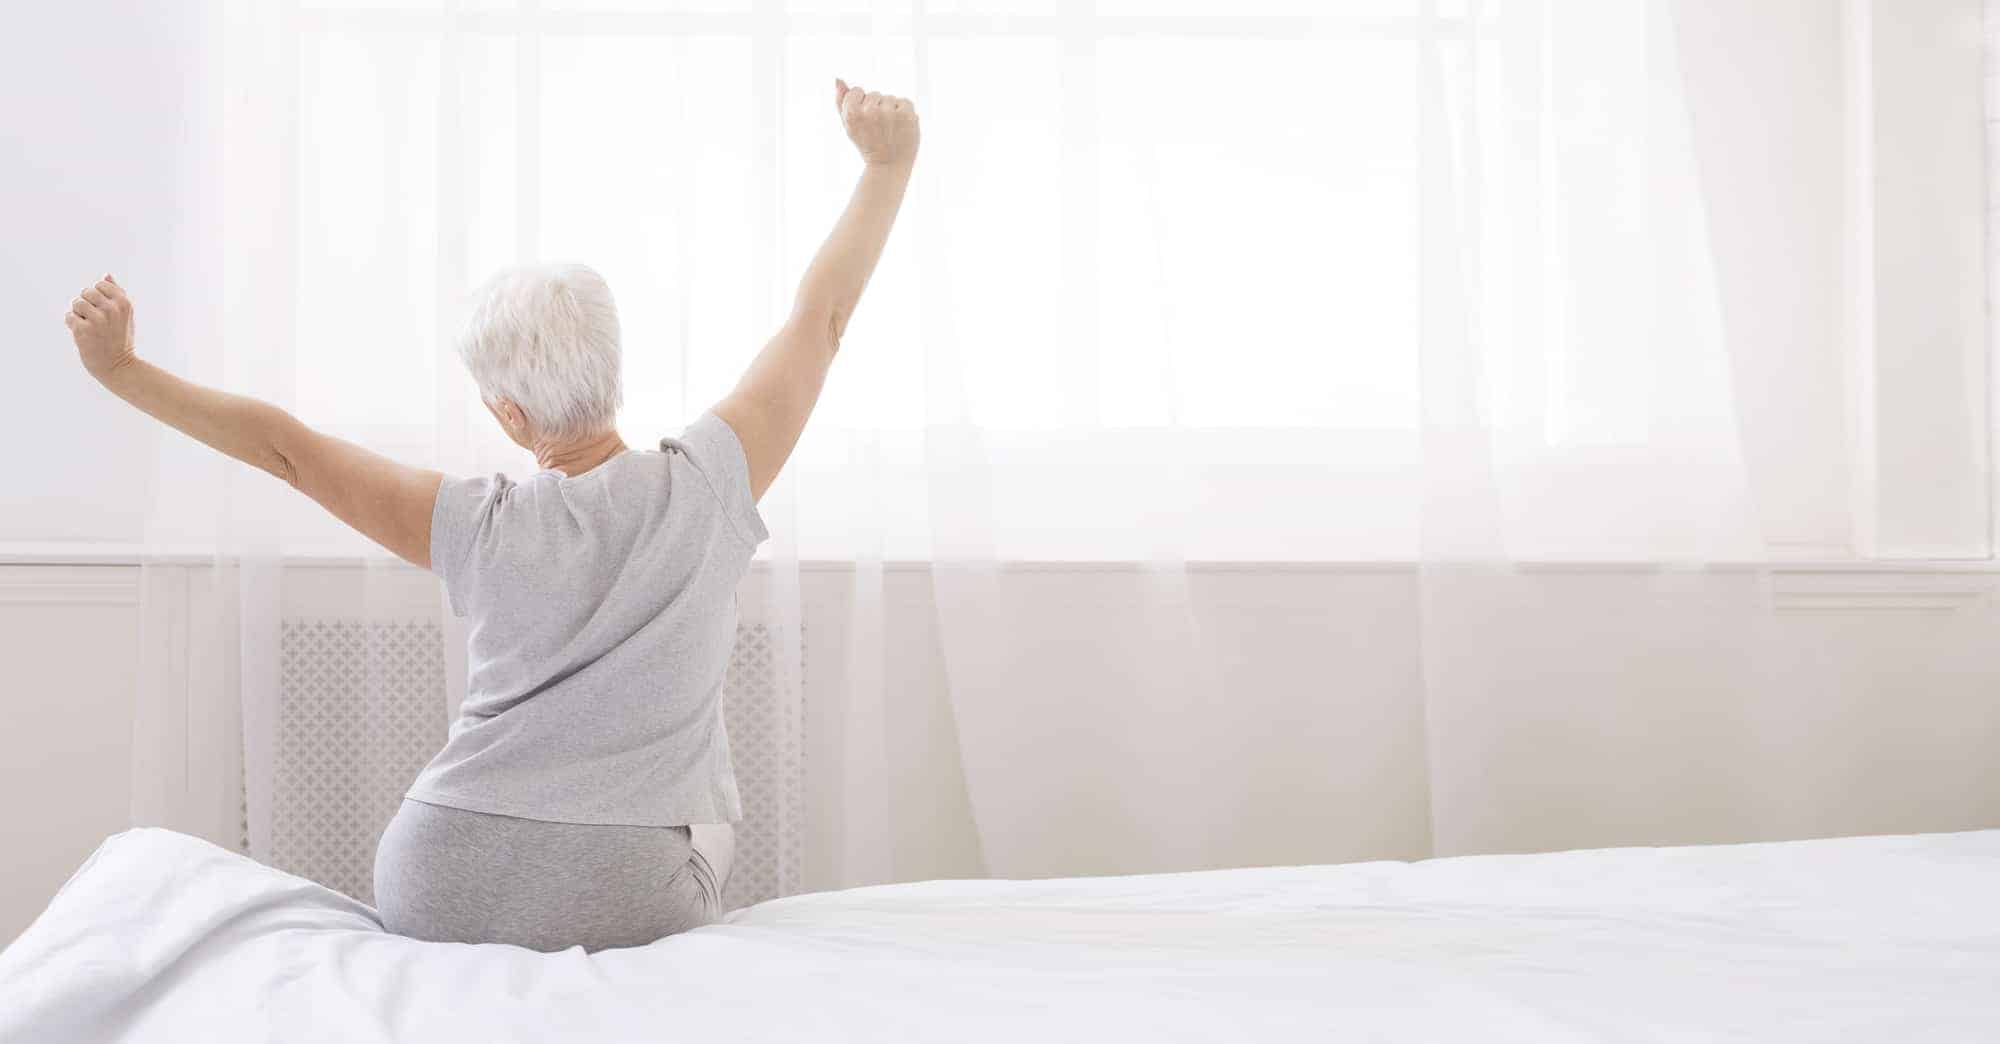 A woman raising her arms on a bed, contemplating hospital bed choices for home use.